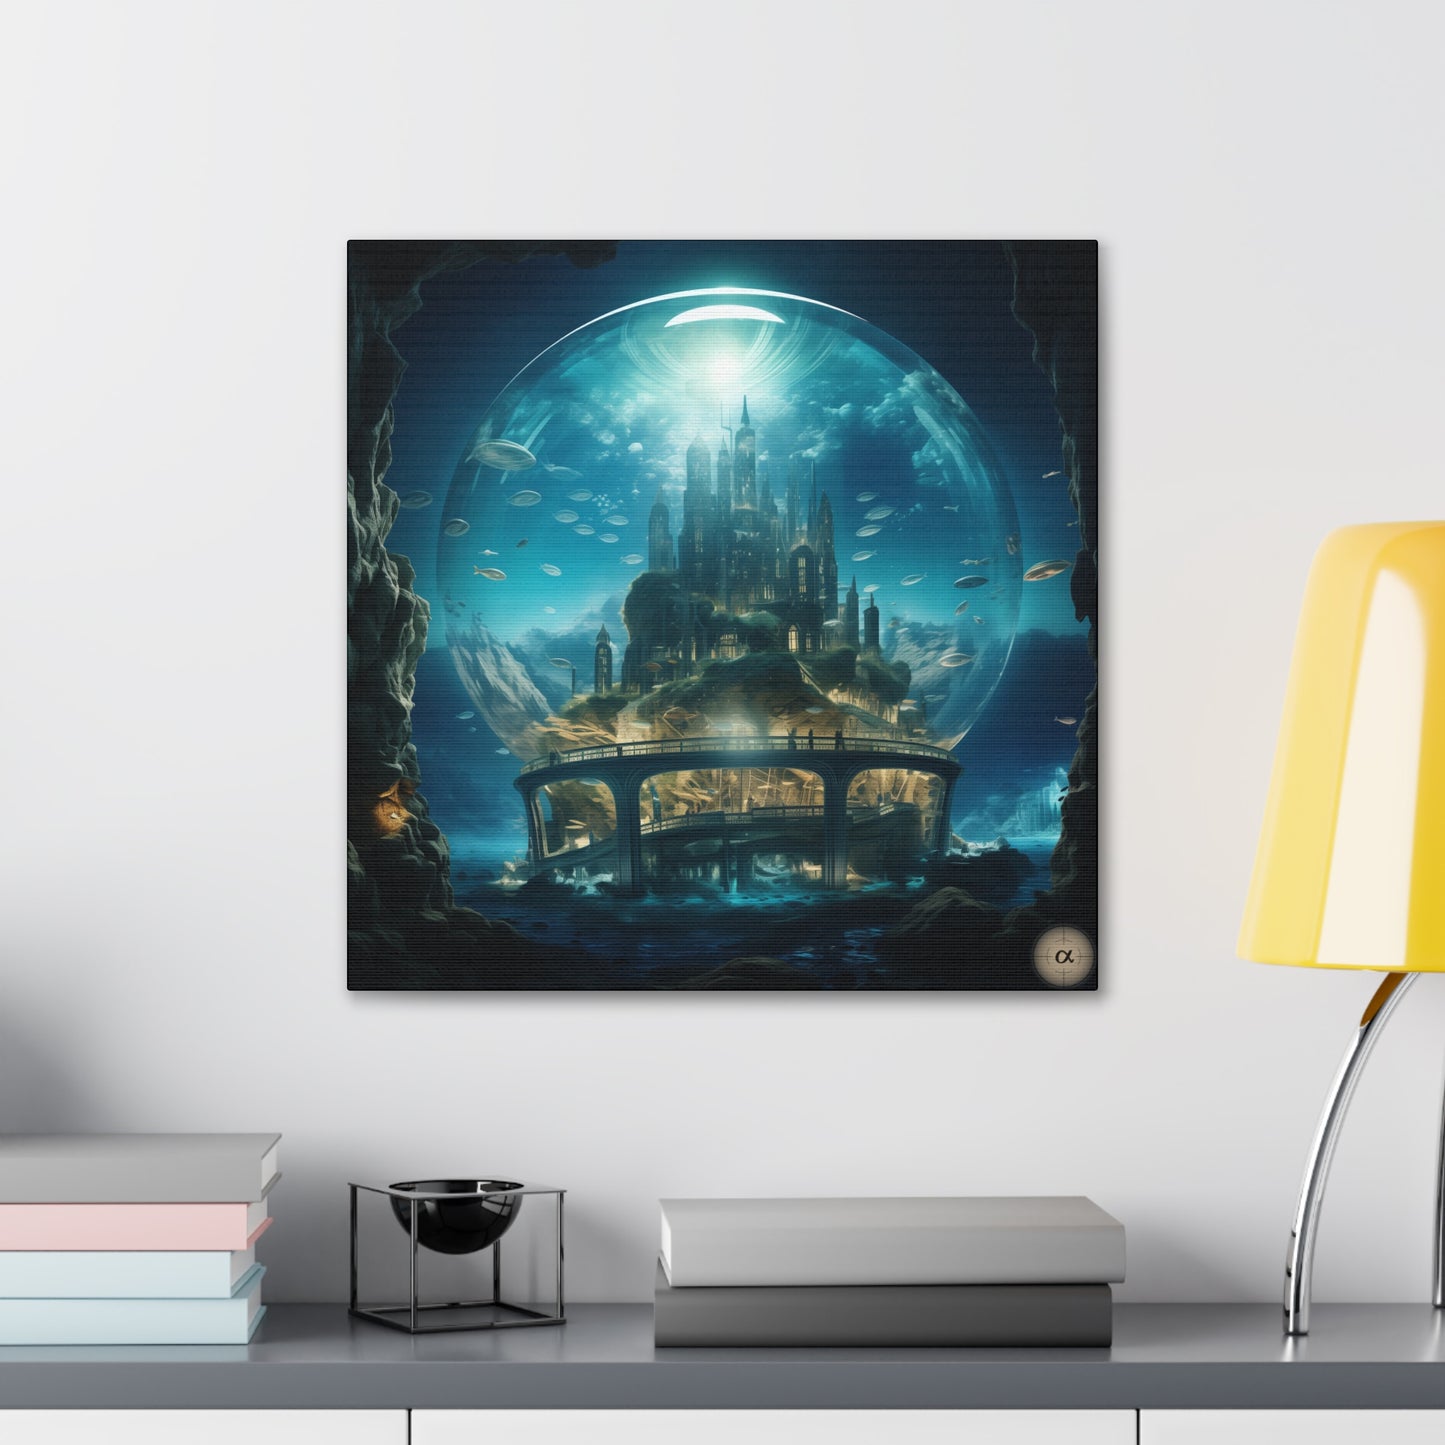 Art by Kendyll: "Atlantis, The Domed City Below" on Canvas